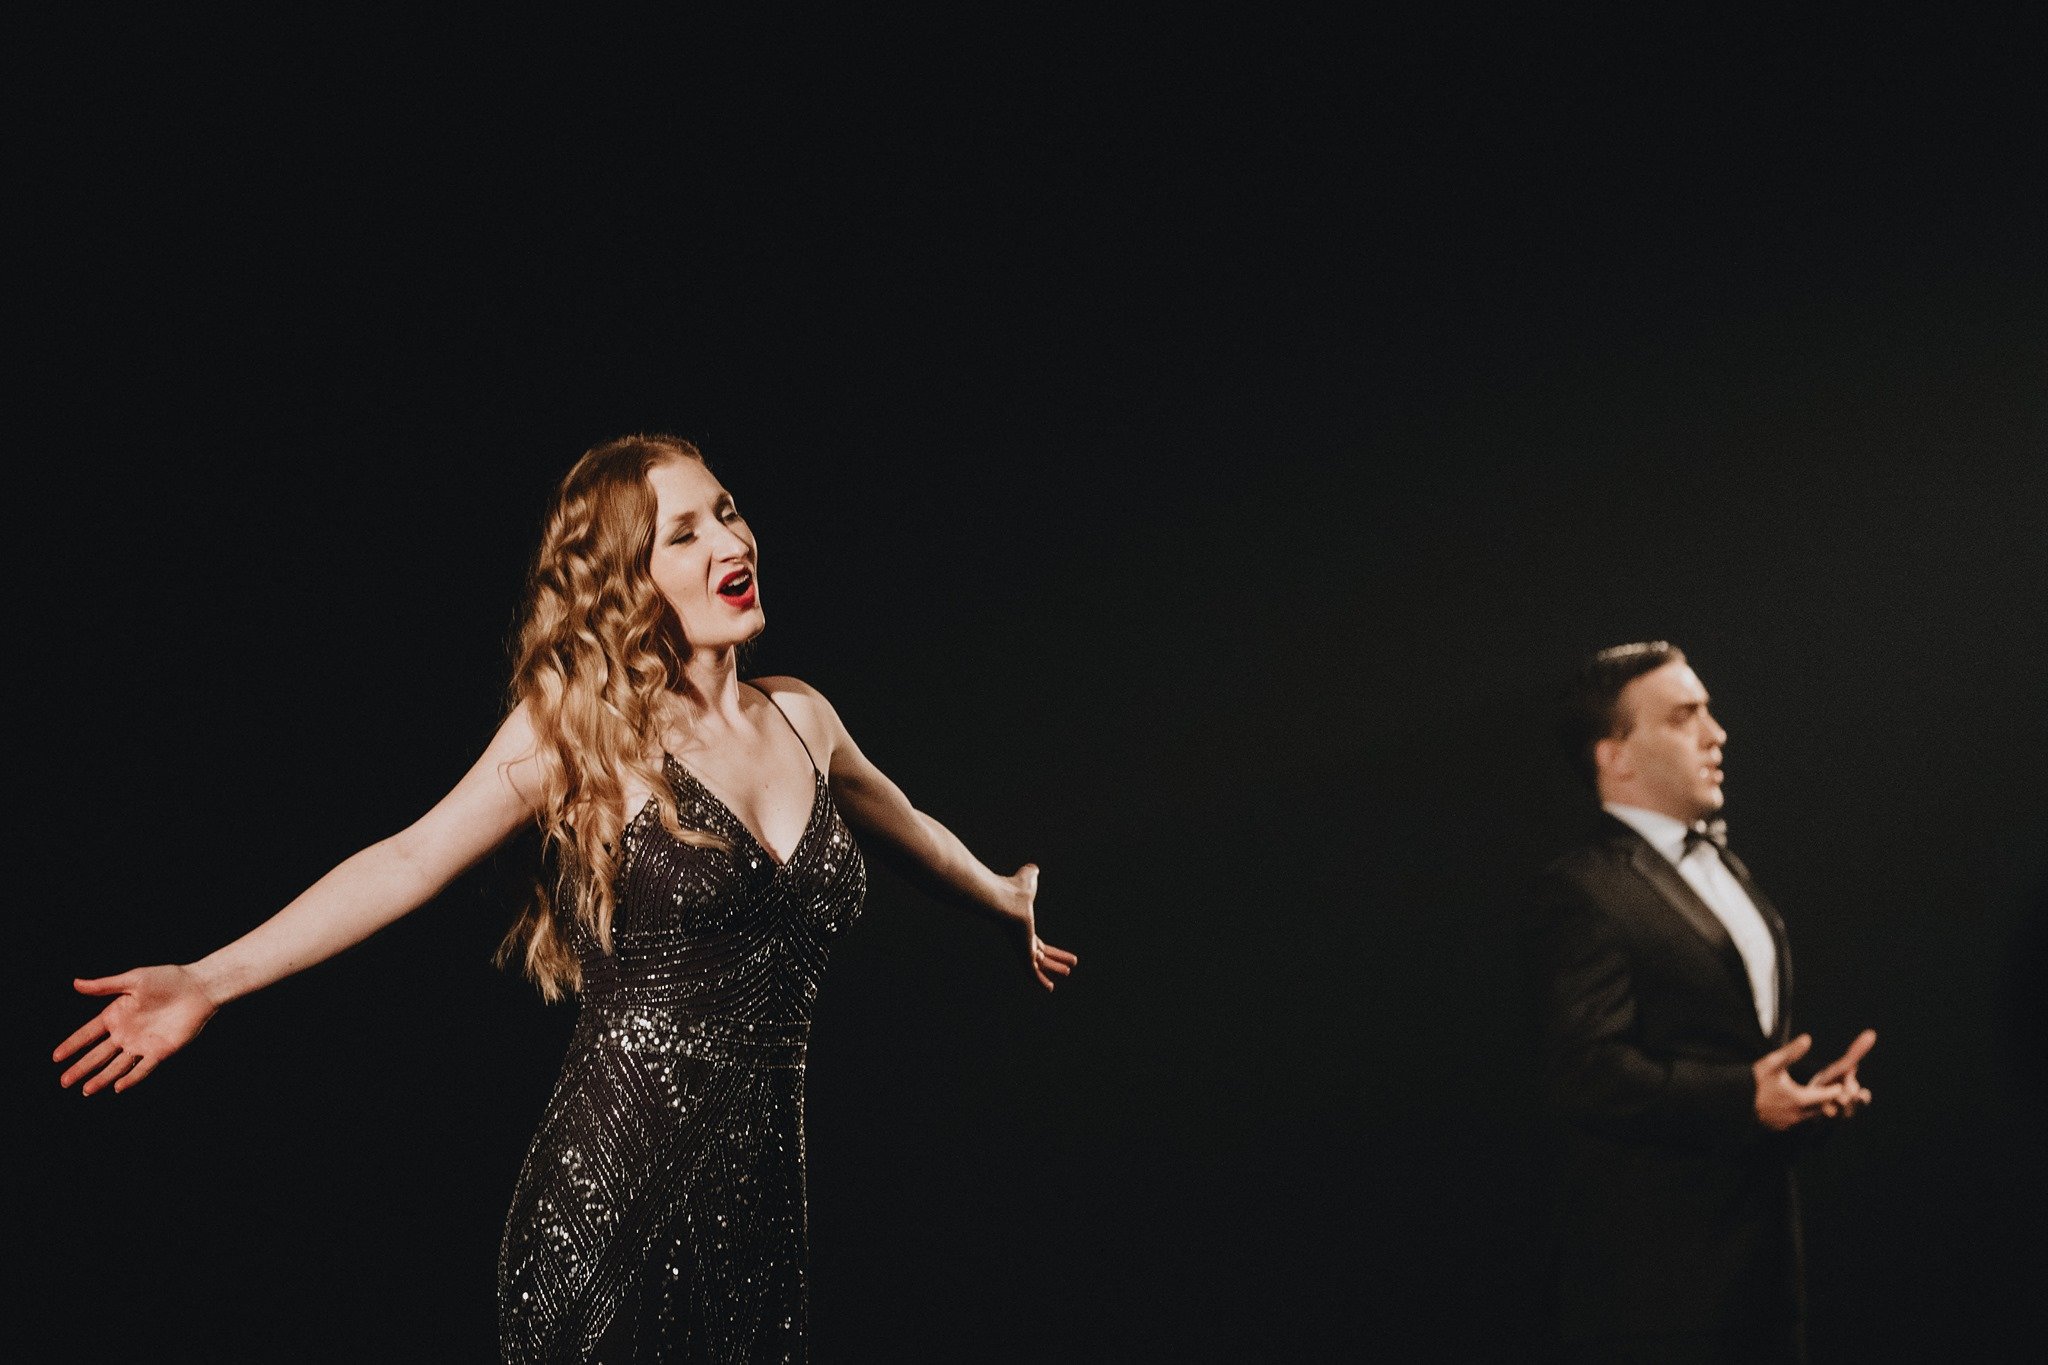  “She has tremendous dramatic presence for a young singer, with a flair for building anticipation and then cleverly pulling back. The more she does the more you wonder what else she’s capable of, or will be capable of.”- Opera Canada [Brent Calis Pho